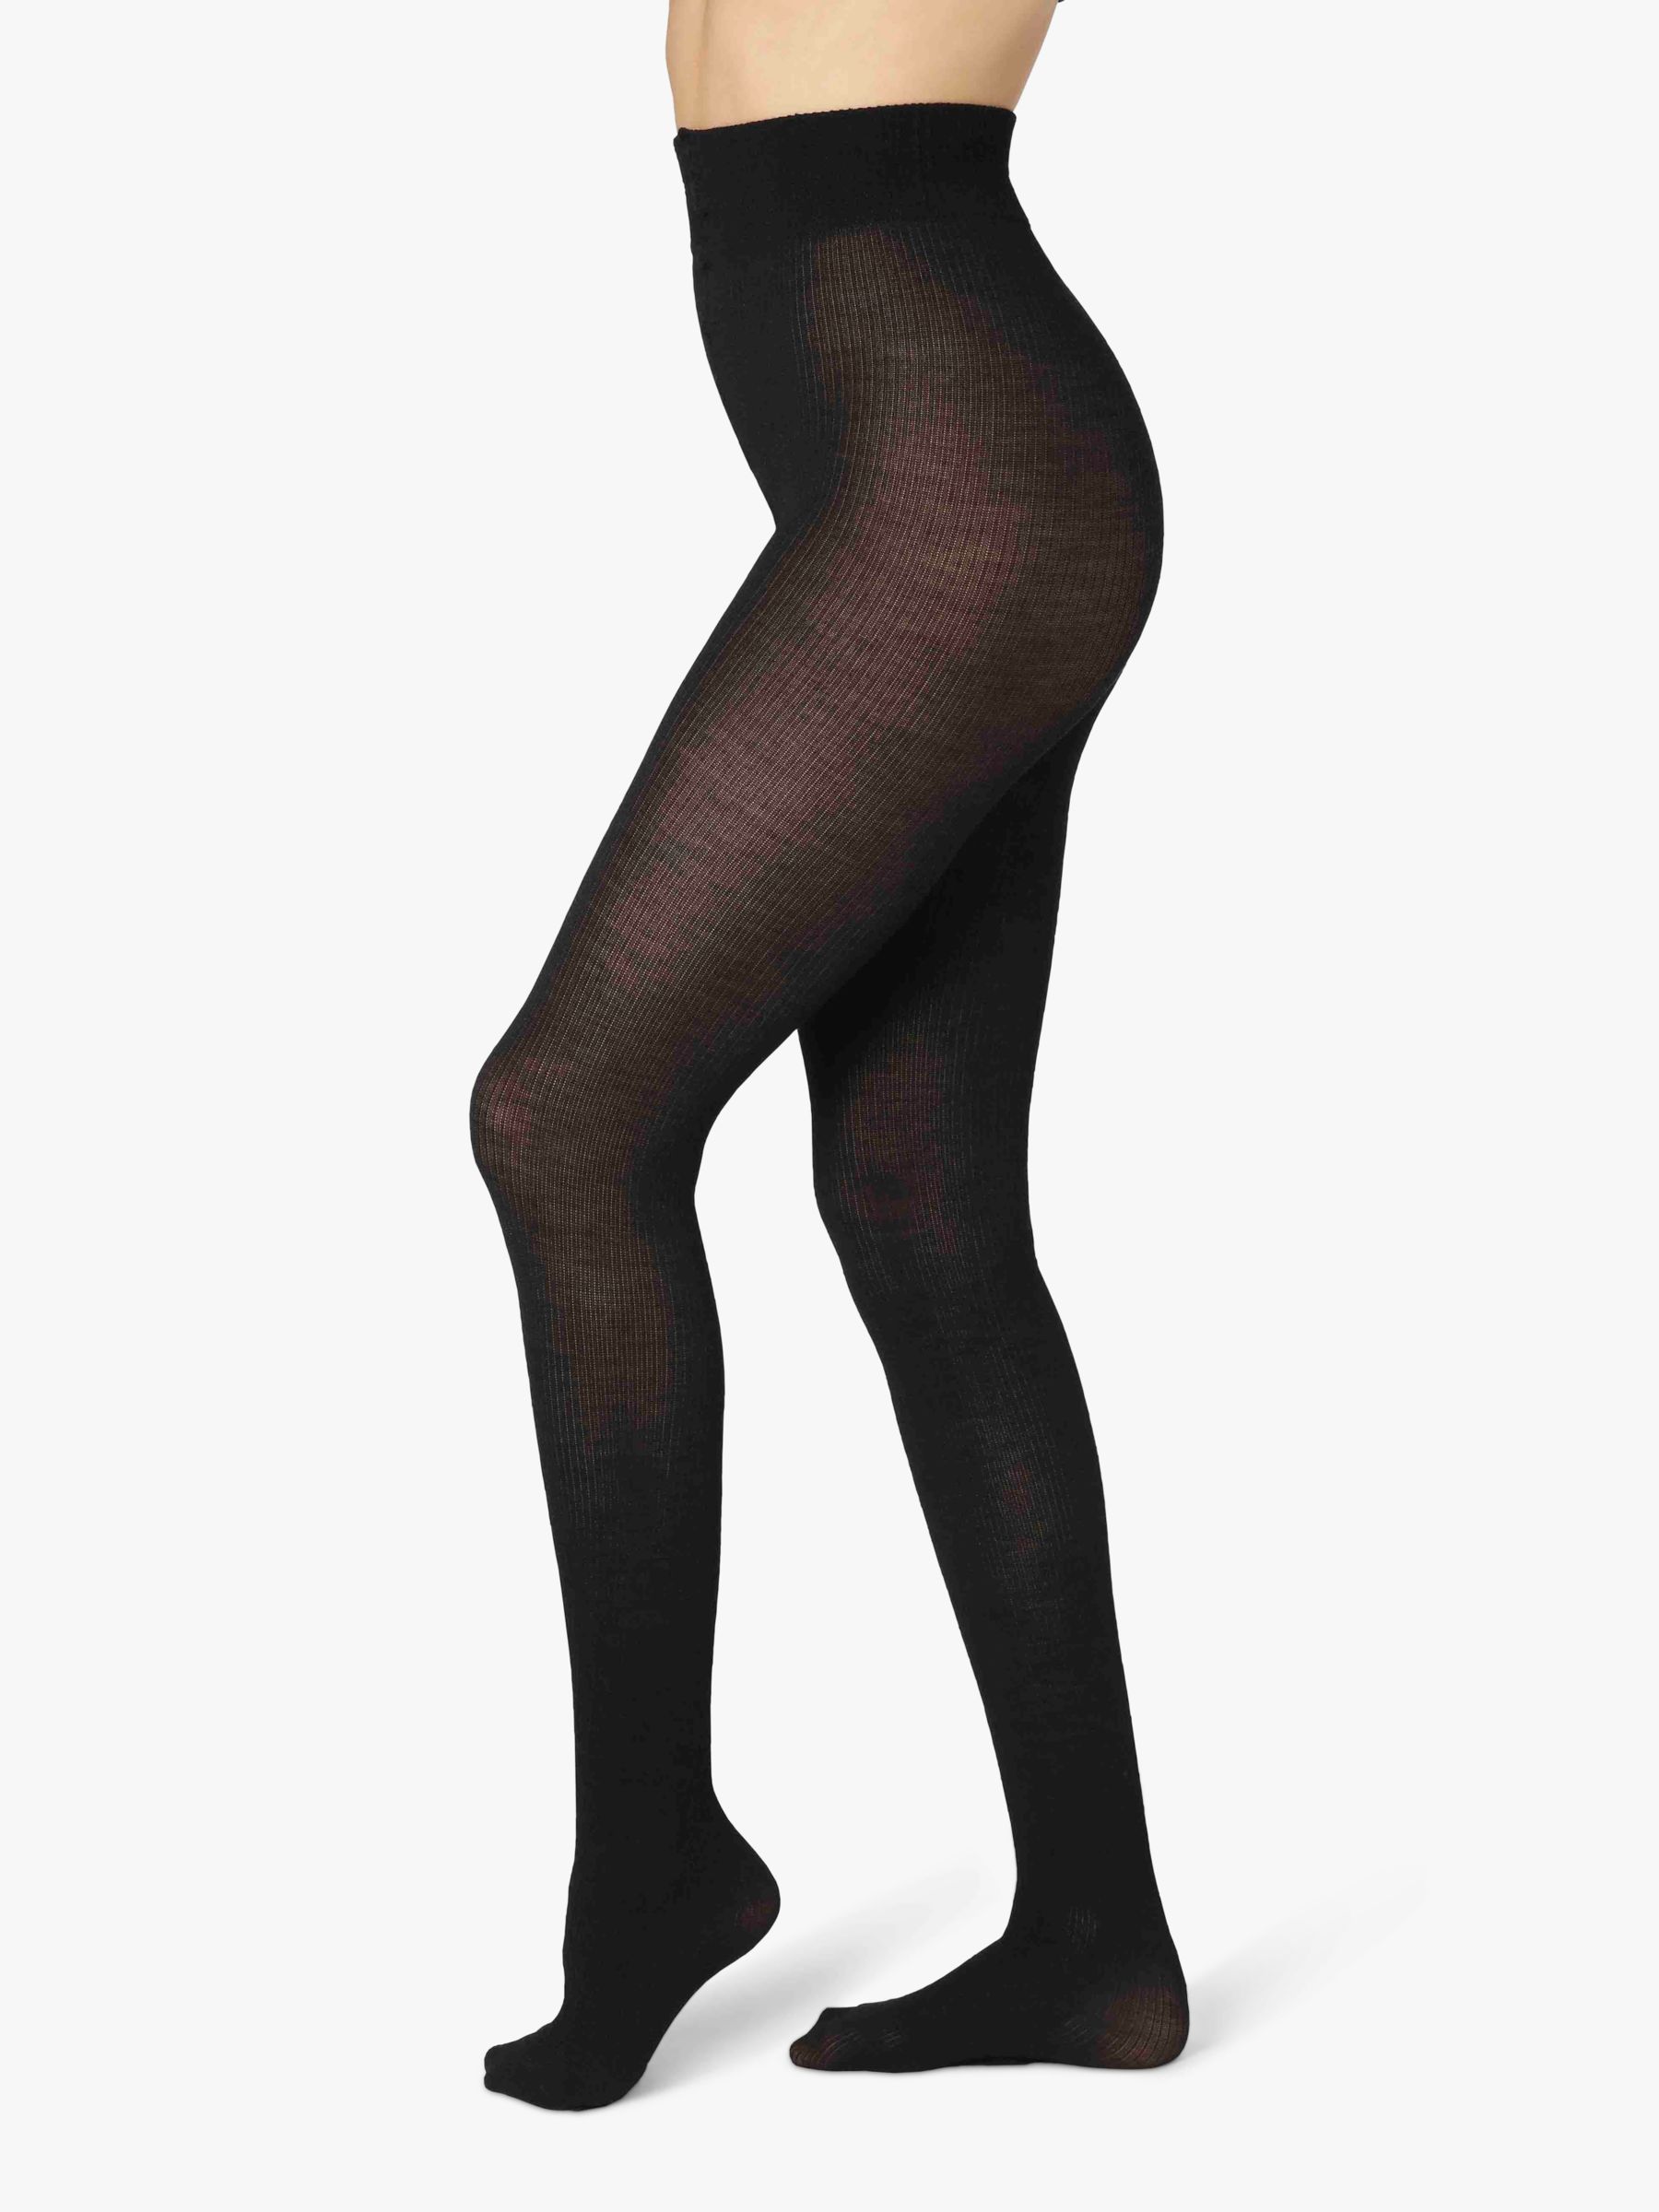 Pounding Christian Incessant john lewis patterned tights Them Rally Dislike